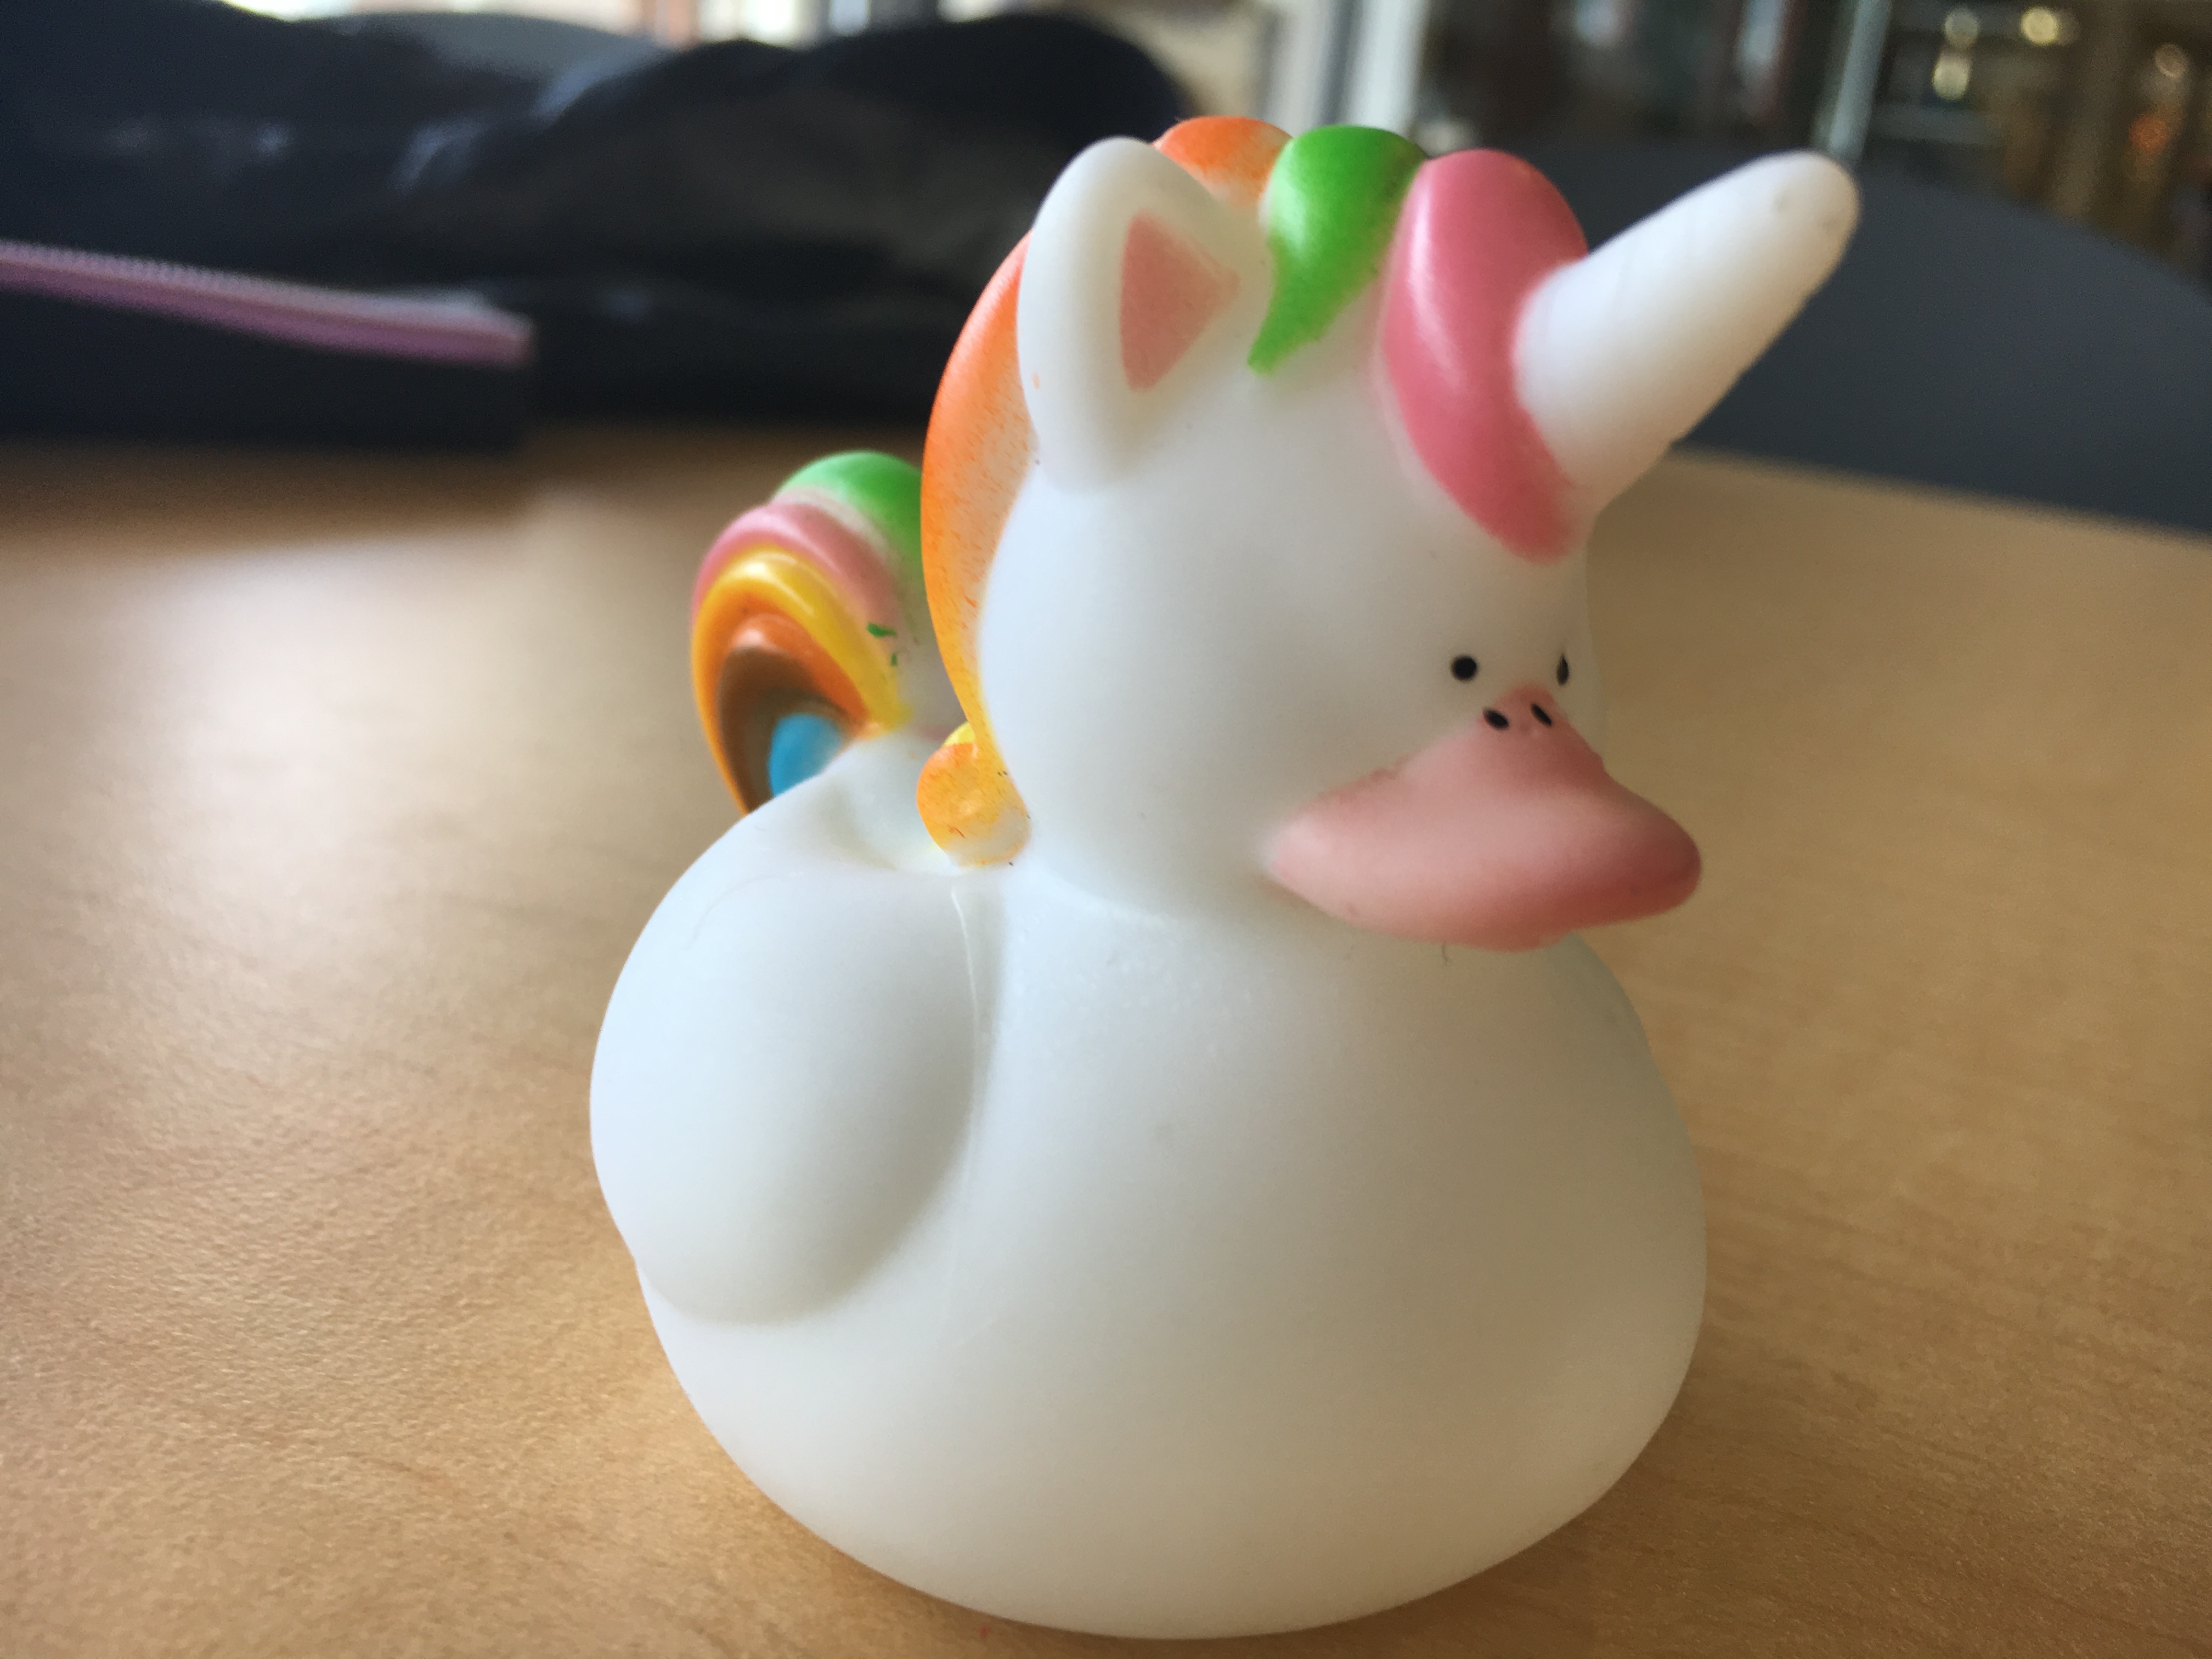 A white, unicorn rubber ducky with a rainbow mane.